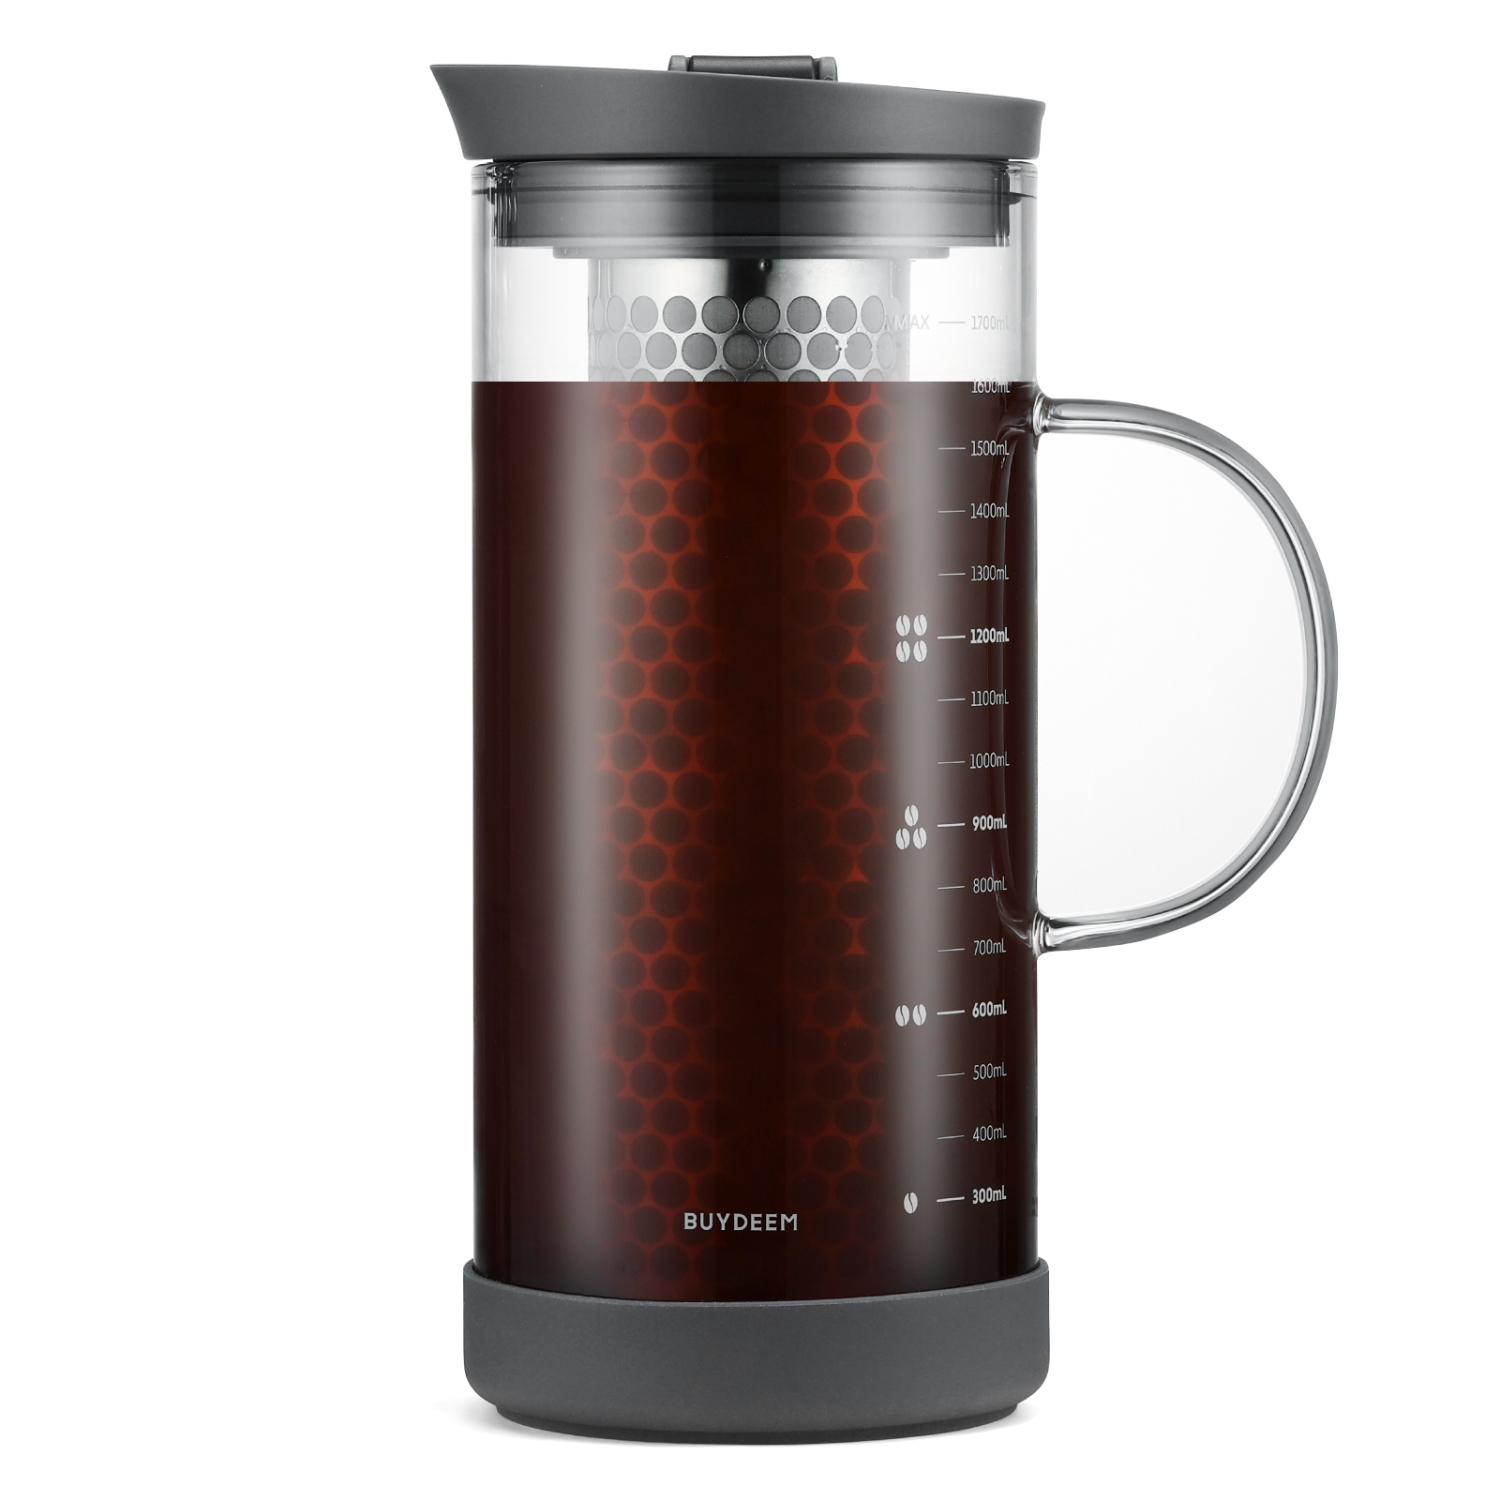 BUYDEEM Cold Brew Coffee and Tea Maker, 57oz Large Capacity Borosilicate Glass Pitcher with and Removable 18/8 Stainless Steel Brewing Mesh Filter, Dishwasher Safe, Ink Grey